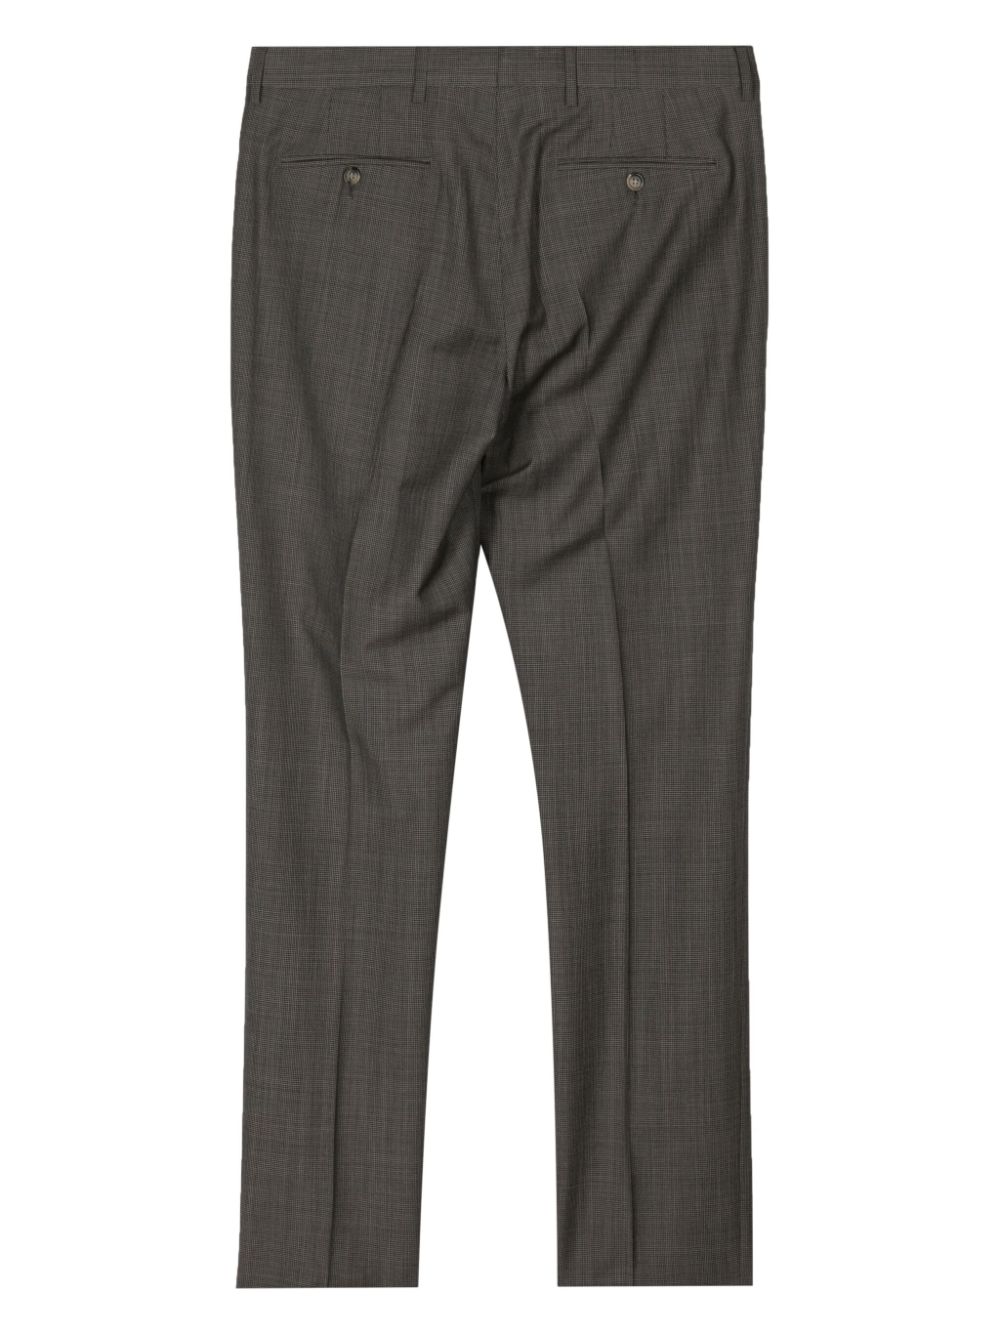 Paul Smith mélange-effect tailored trousers - Beige